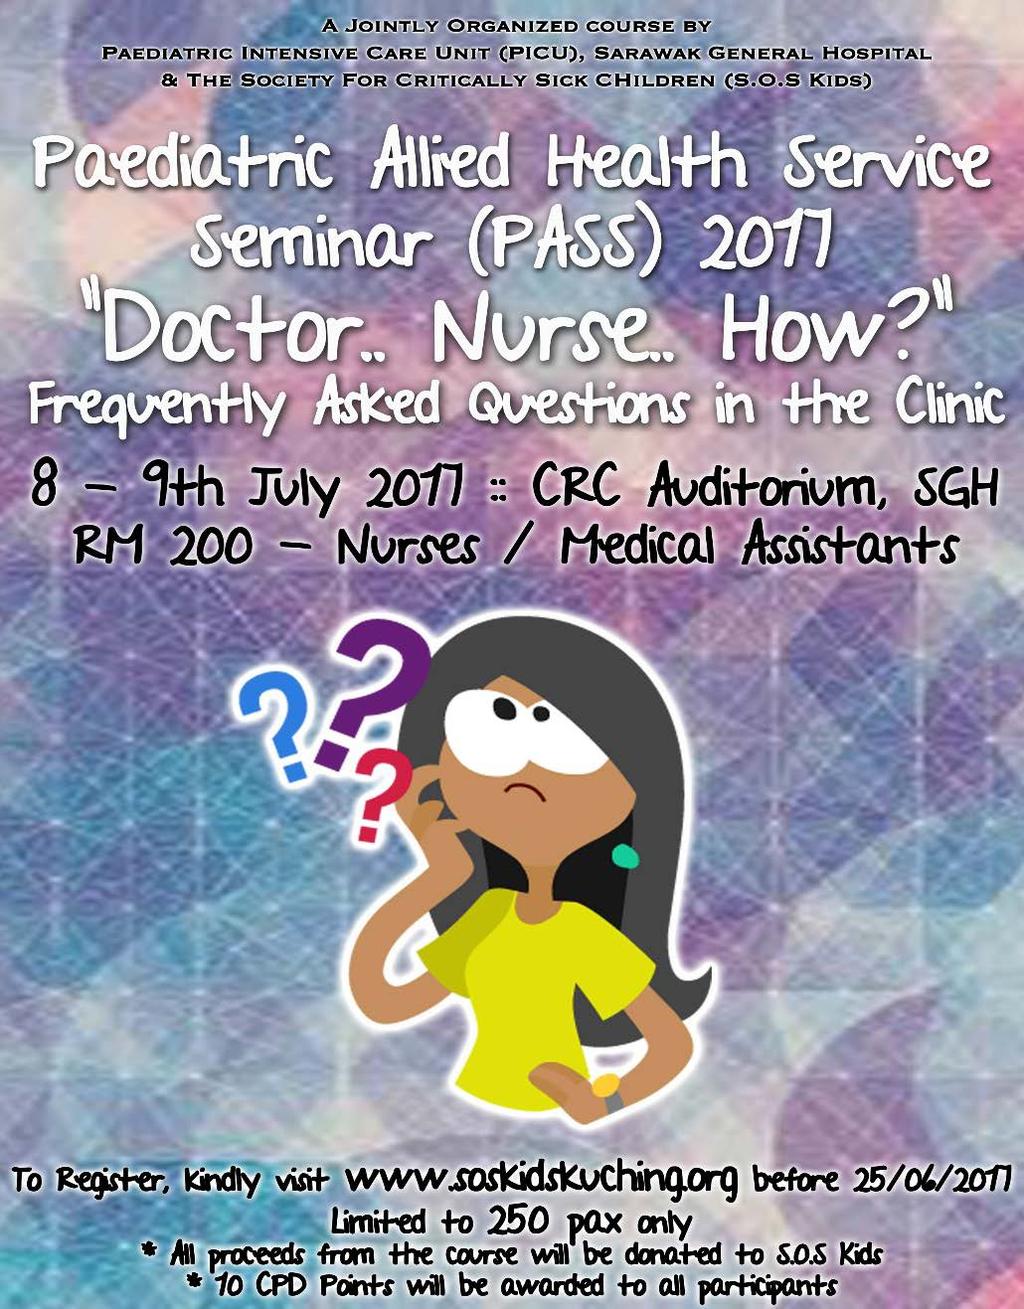 Next Course by PICU & SOSKIDS: July 8 & 9 Topics include: 1. Child development & learning 2. Hearing & speech 3. Common ENT problems 4.